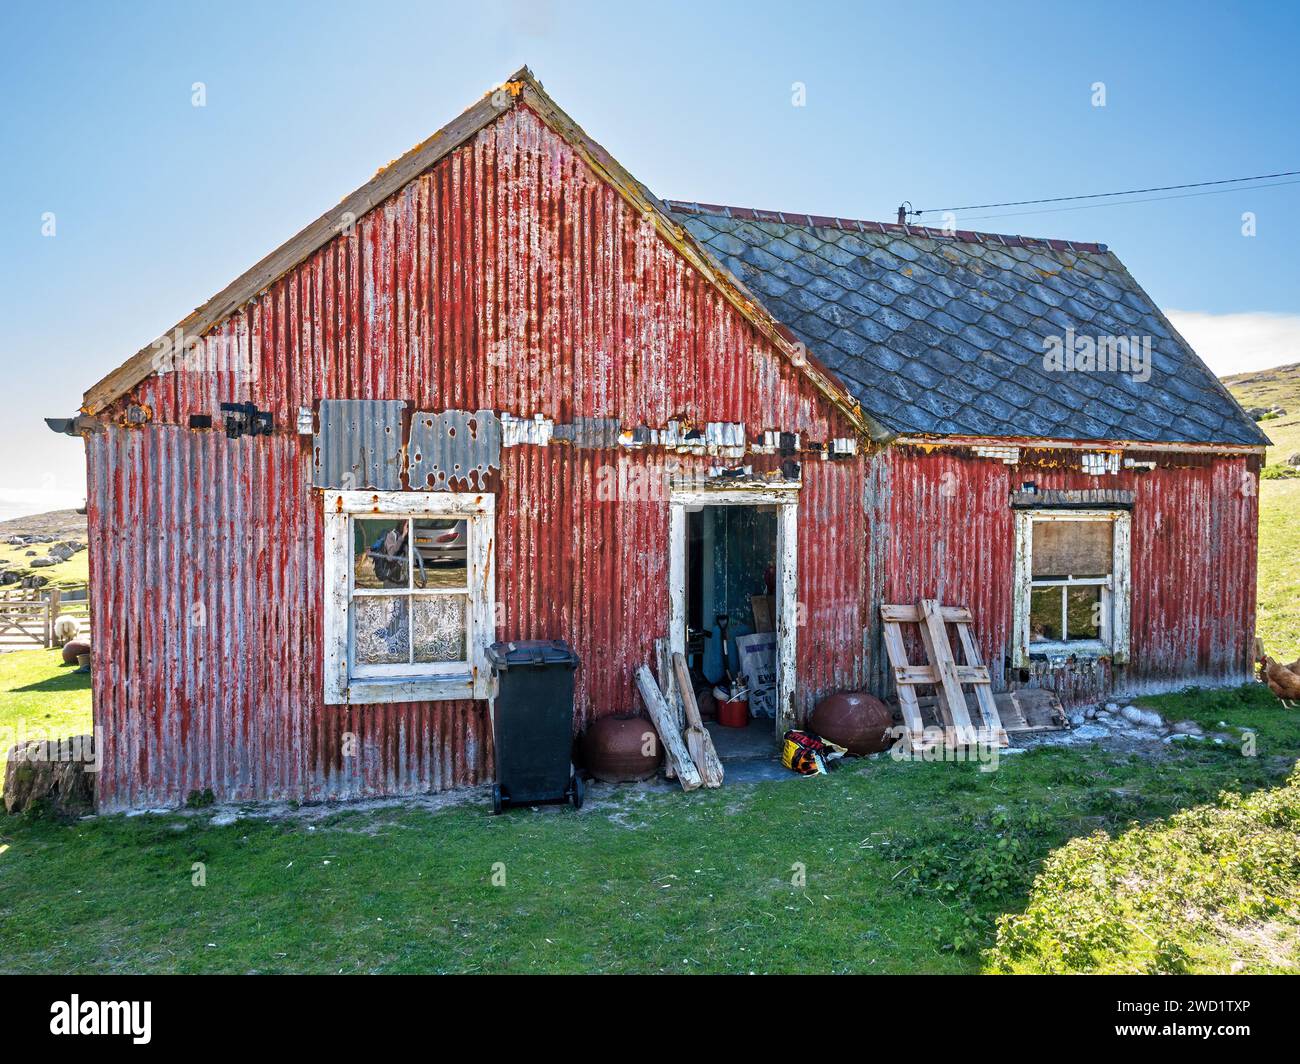 An old rusty corrugated iron building at the remote croft community of Hushinish on the isle of Harris in the Outer Hebrides, Scotland, UK Stock Photo